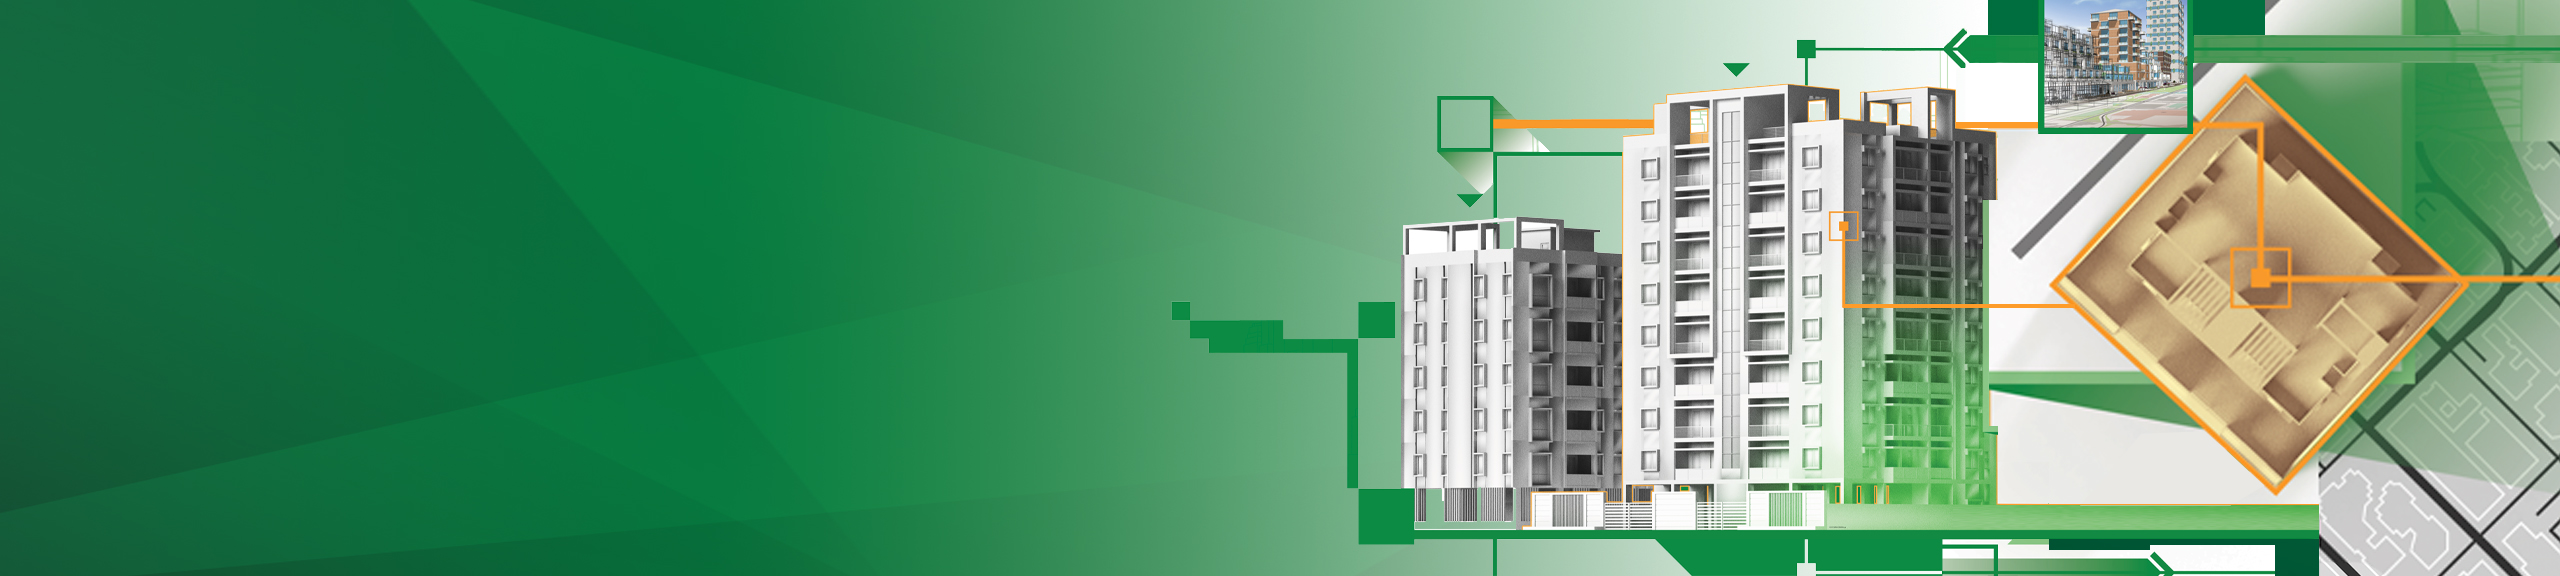 A graphic of two skyscrapers overlaid with building schematics, a map, and a street-level photo of the structure, all on a gradient green background